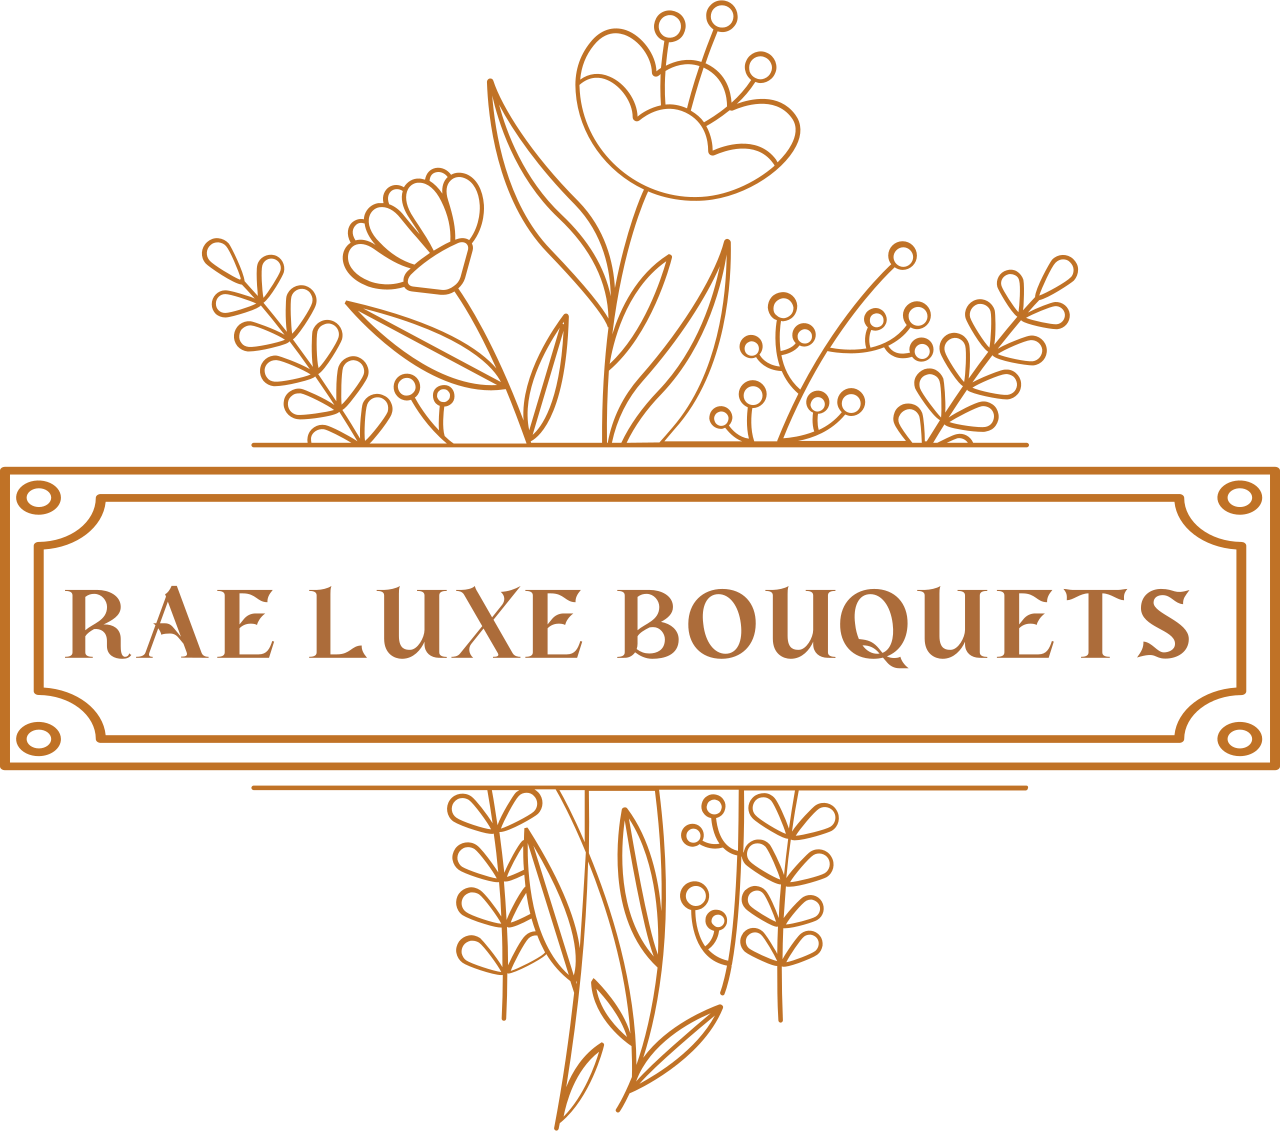 Rae luxe bouquets 's logo